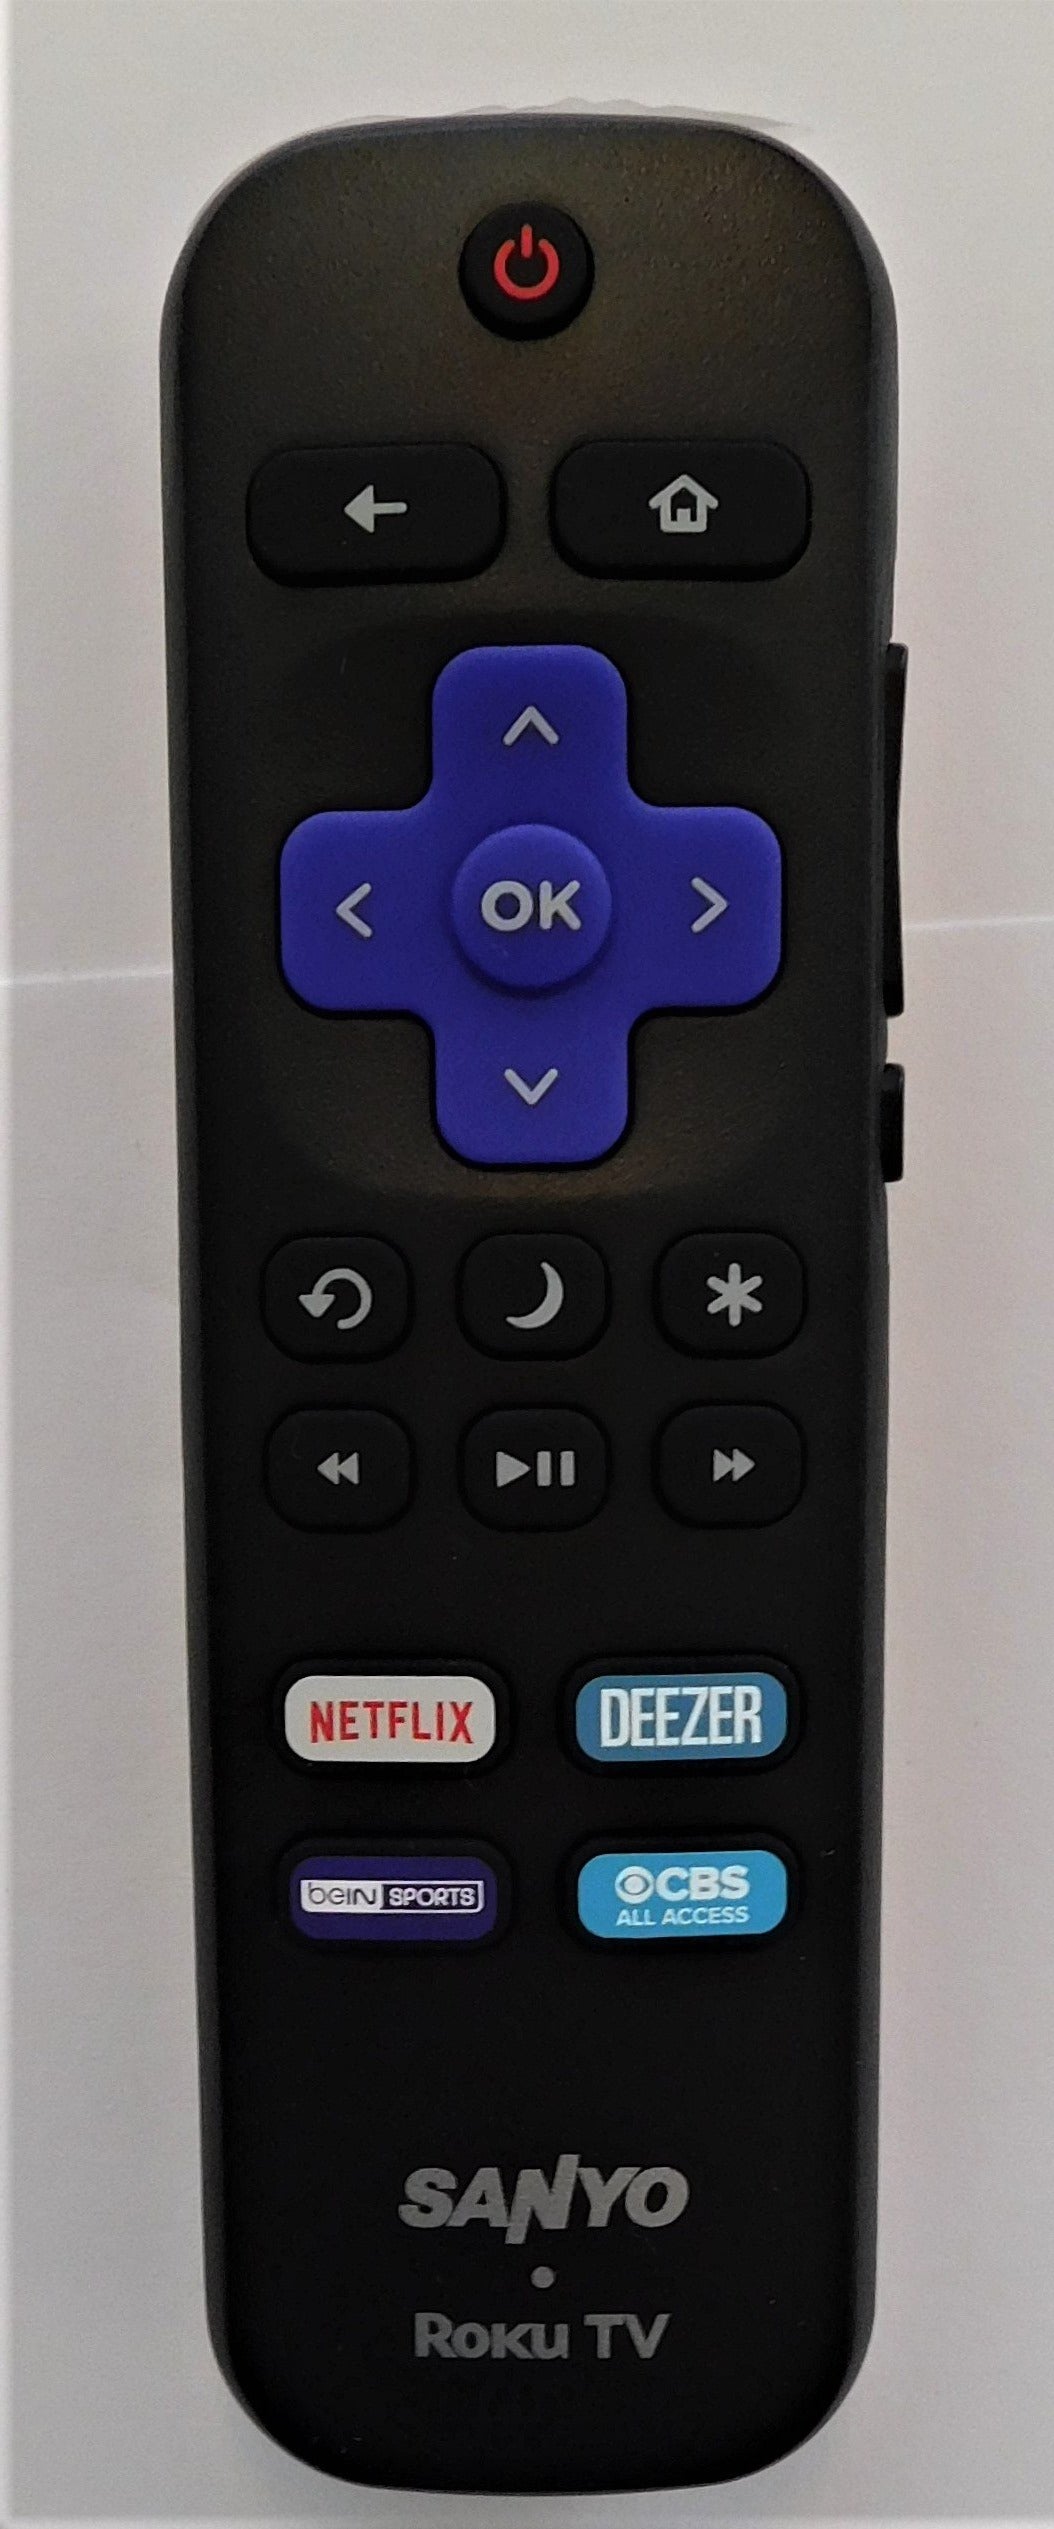 OEM replacement remote control for Sanyo Roku TV 06-518W21-SA01XS